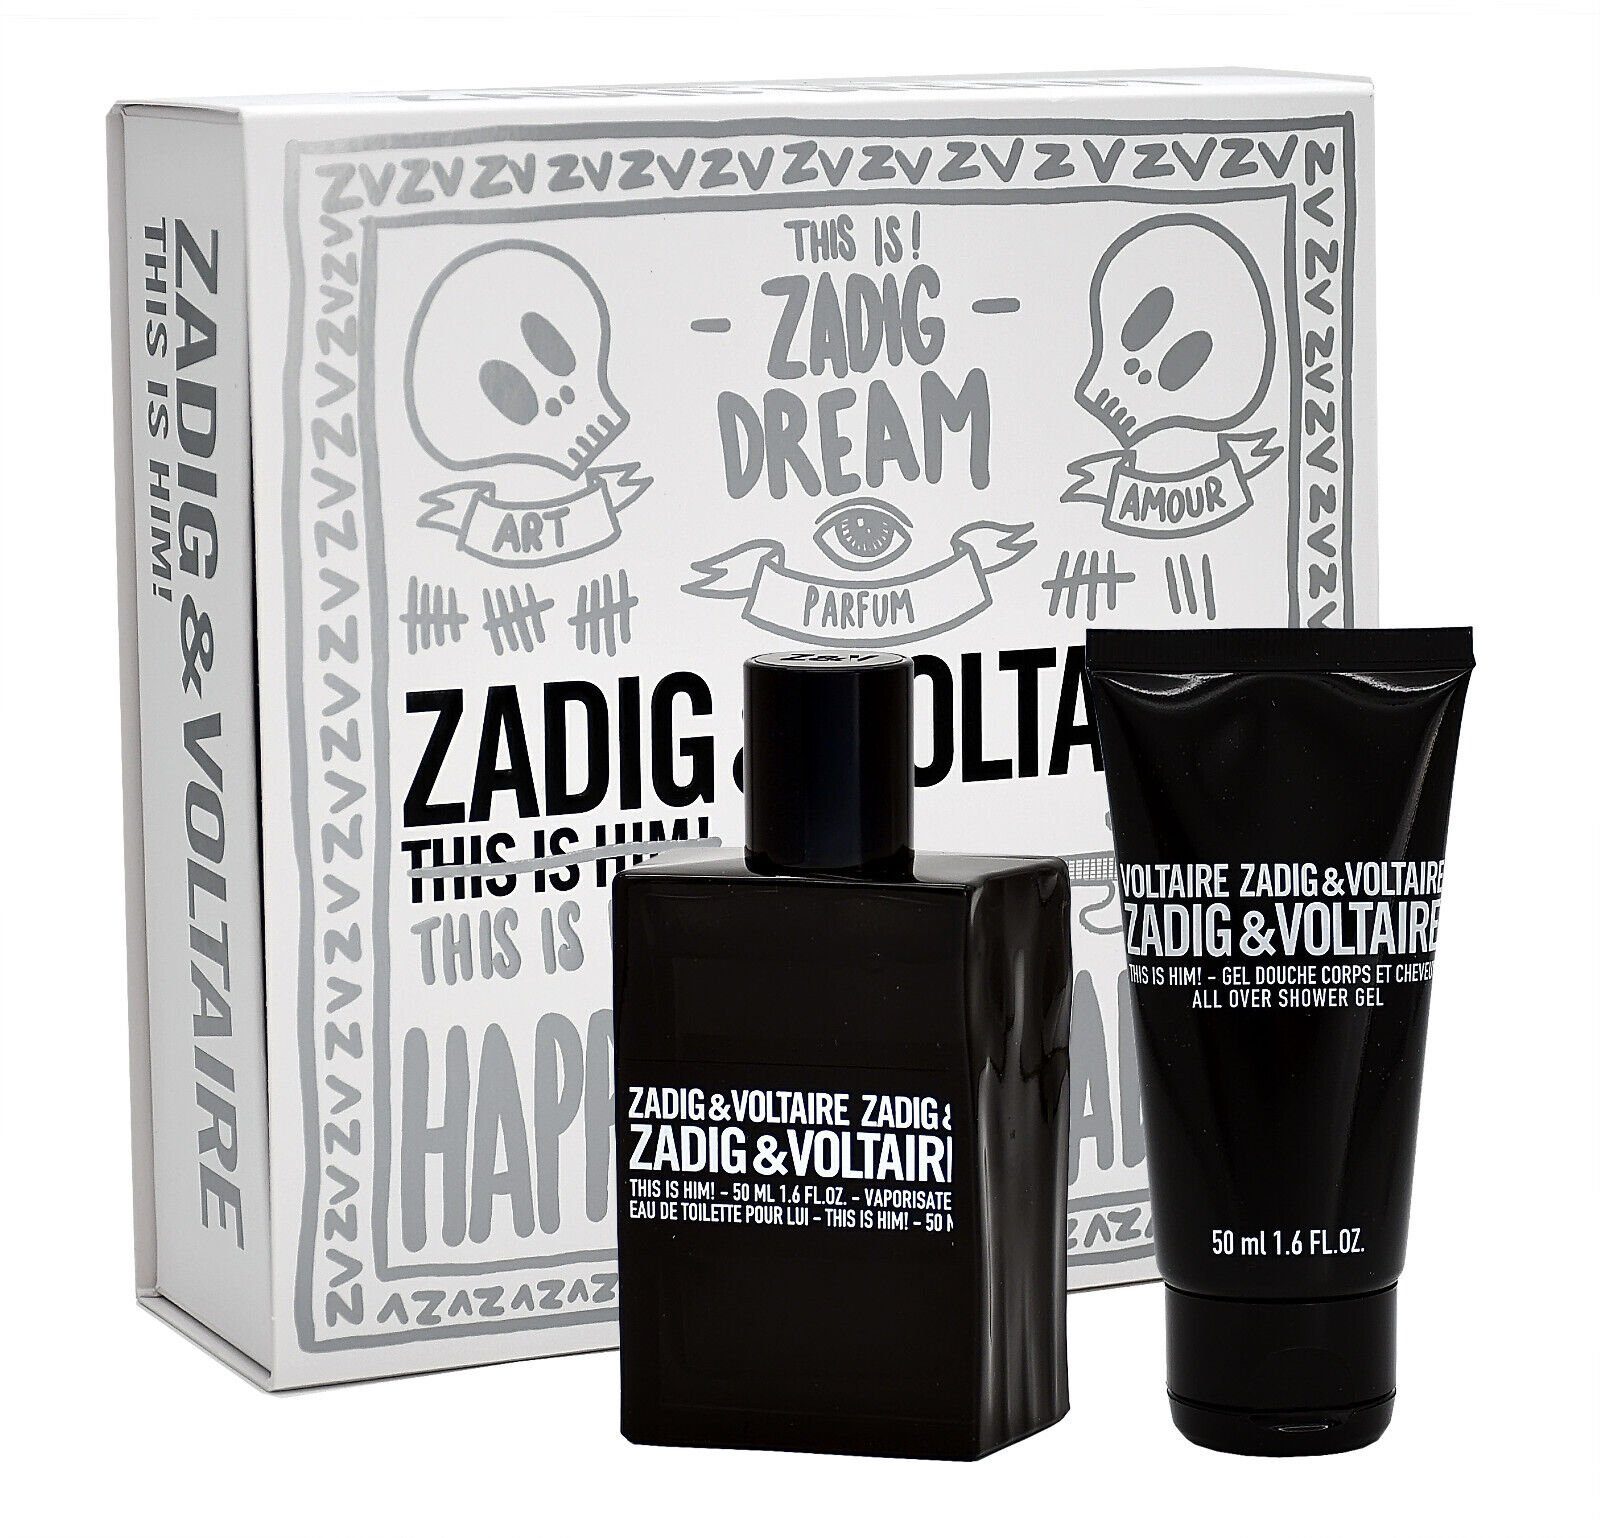 50ML ZADIG VOLTAIRE & EDT Duft-Set THIS ZADIG 50ML SG & + IS VOLTAIRE HIM